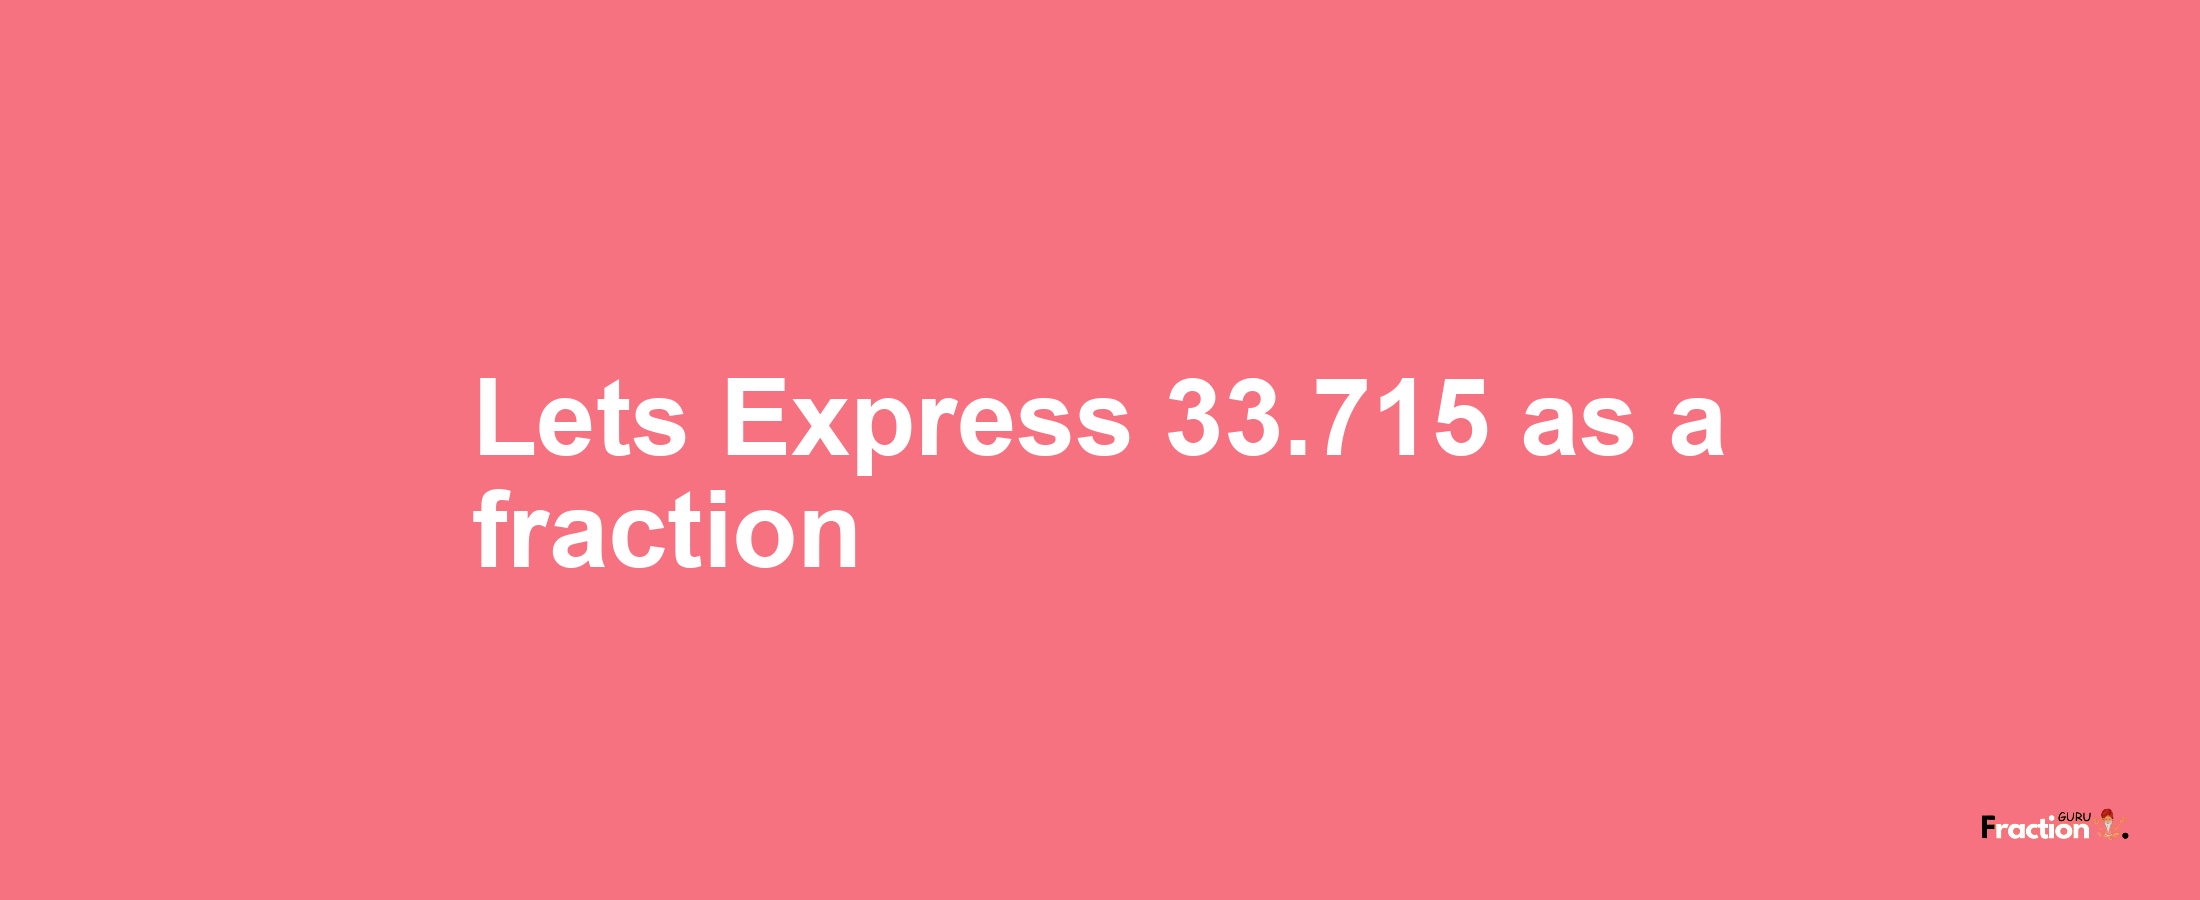 Lets Express 33.715 as afraction